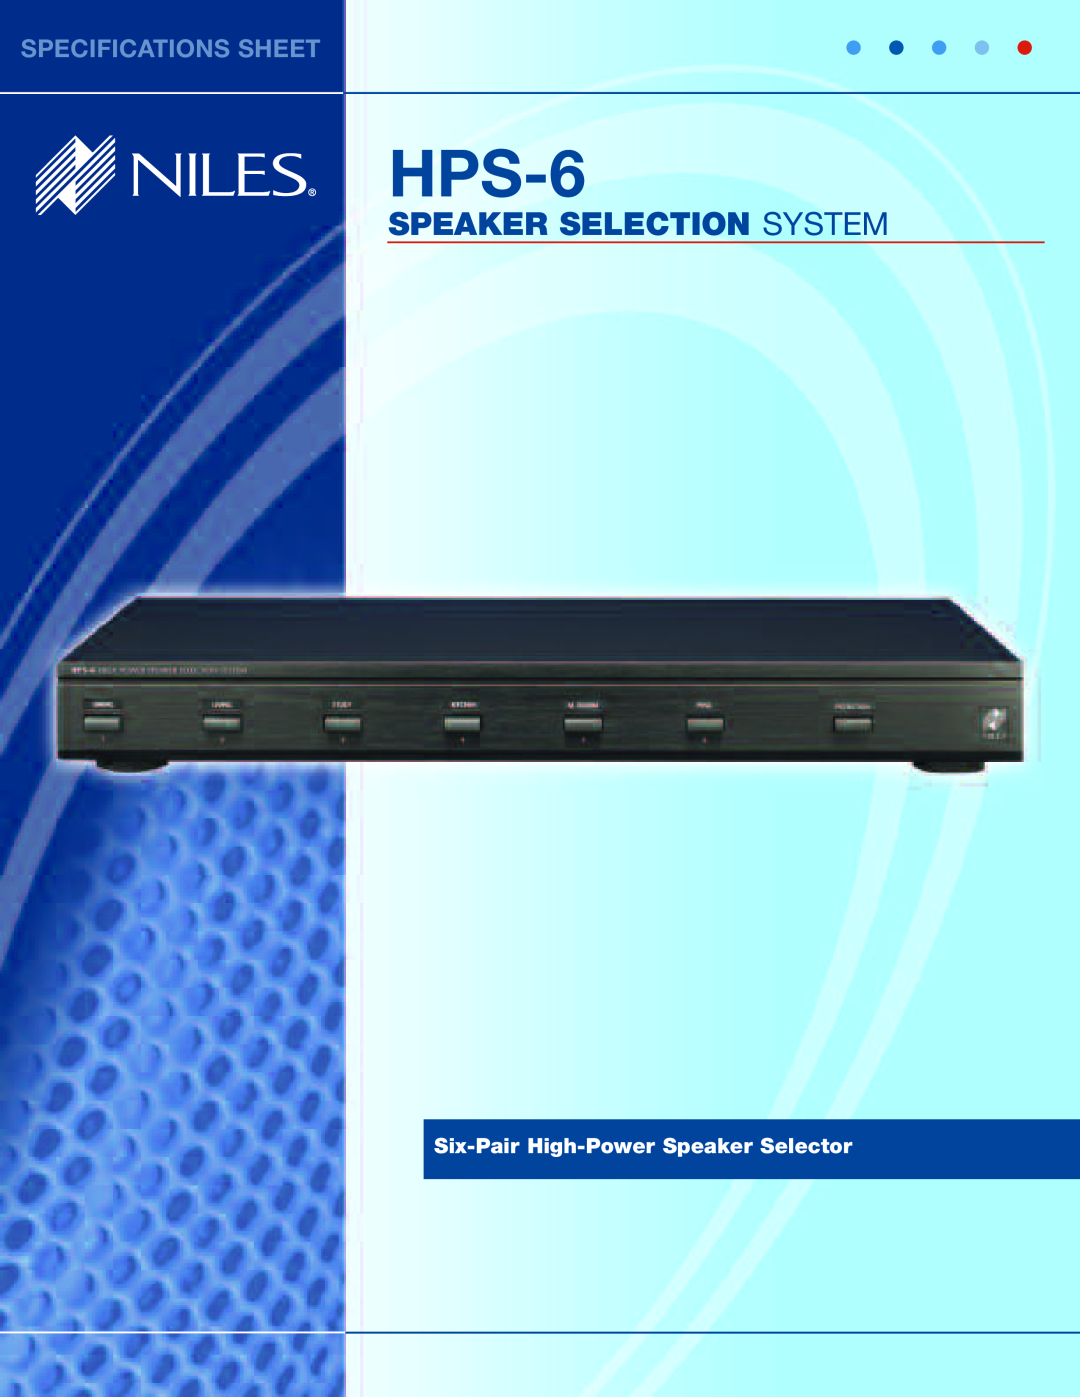 Niles Audio HPS-6 specifications Speaker Selection System, Specifications Sheet, Six-Pair High-PowerSpeaker Selector 